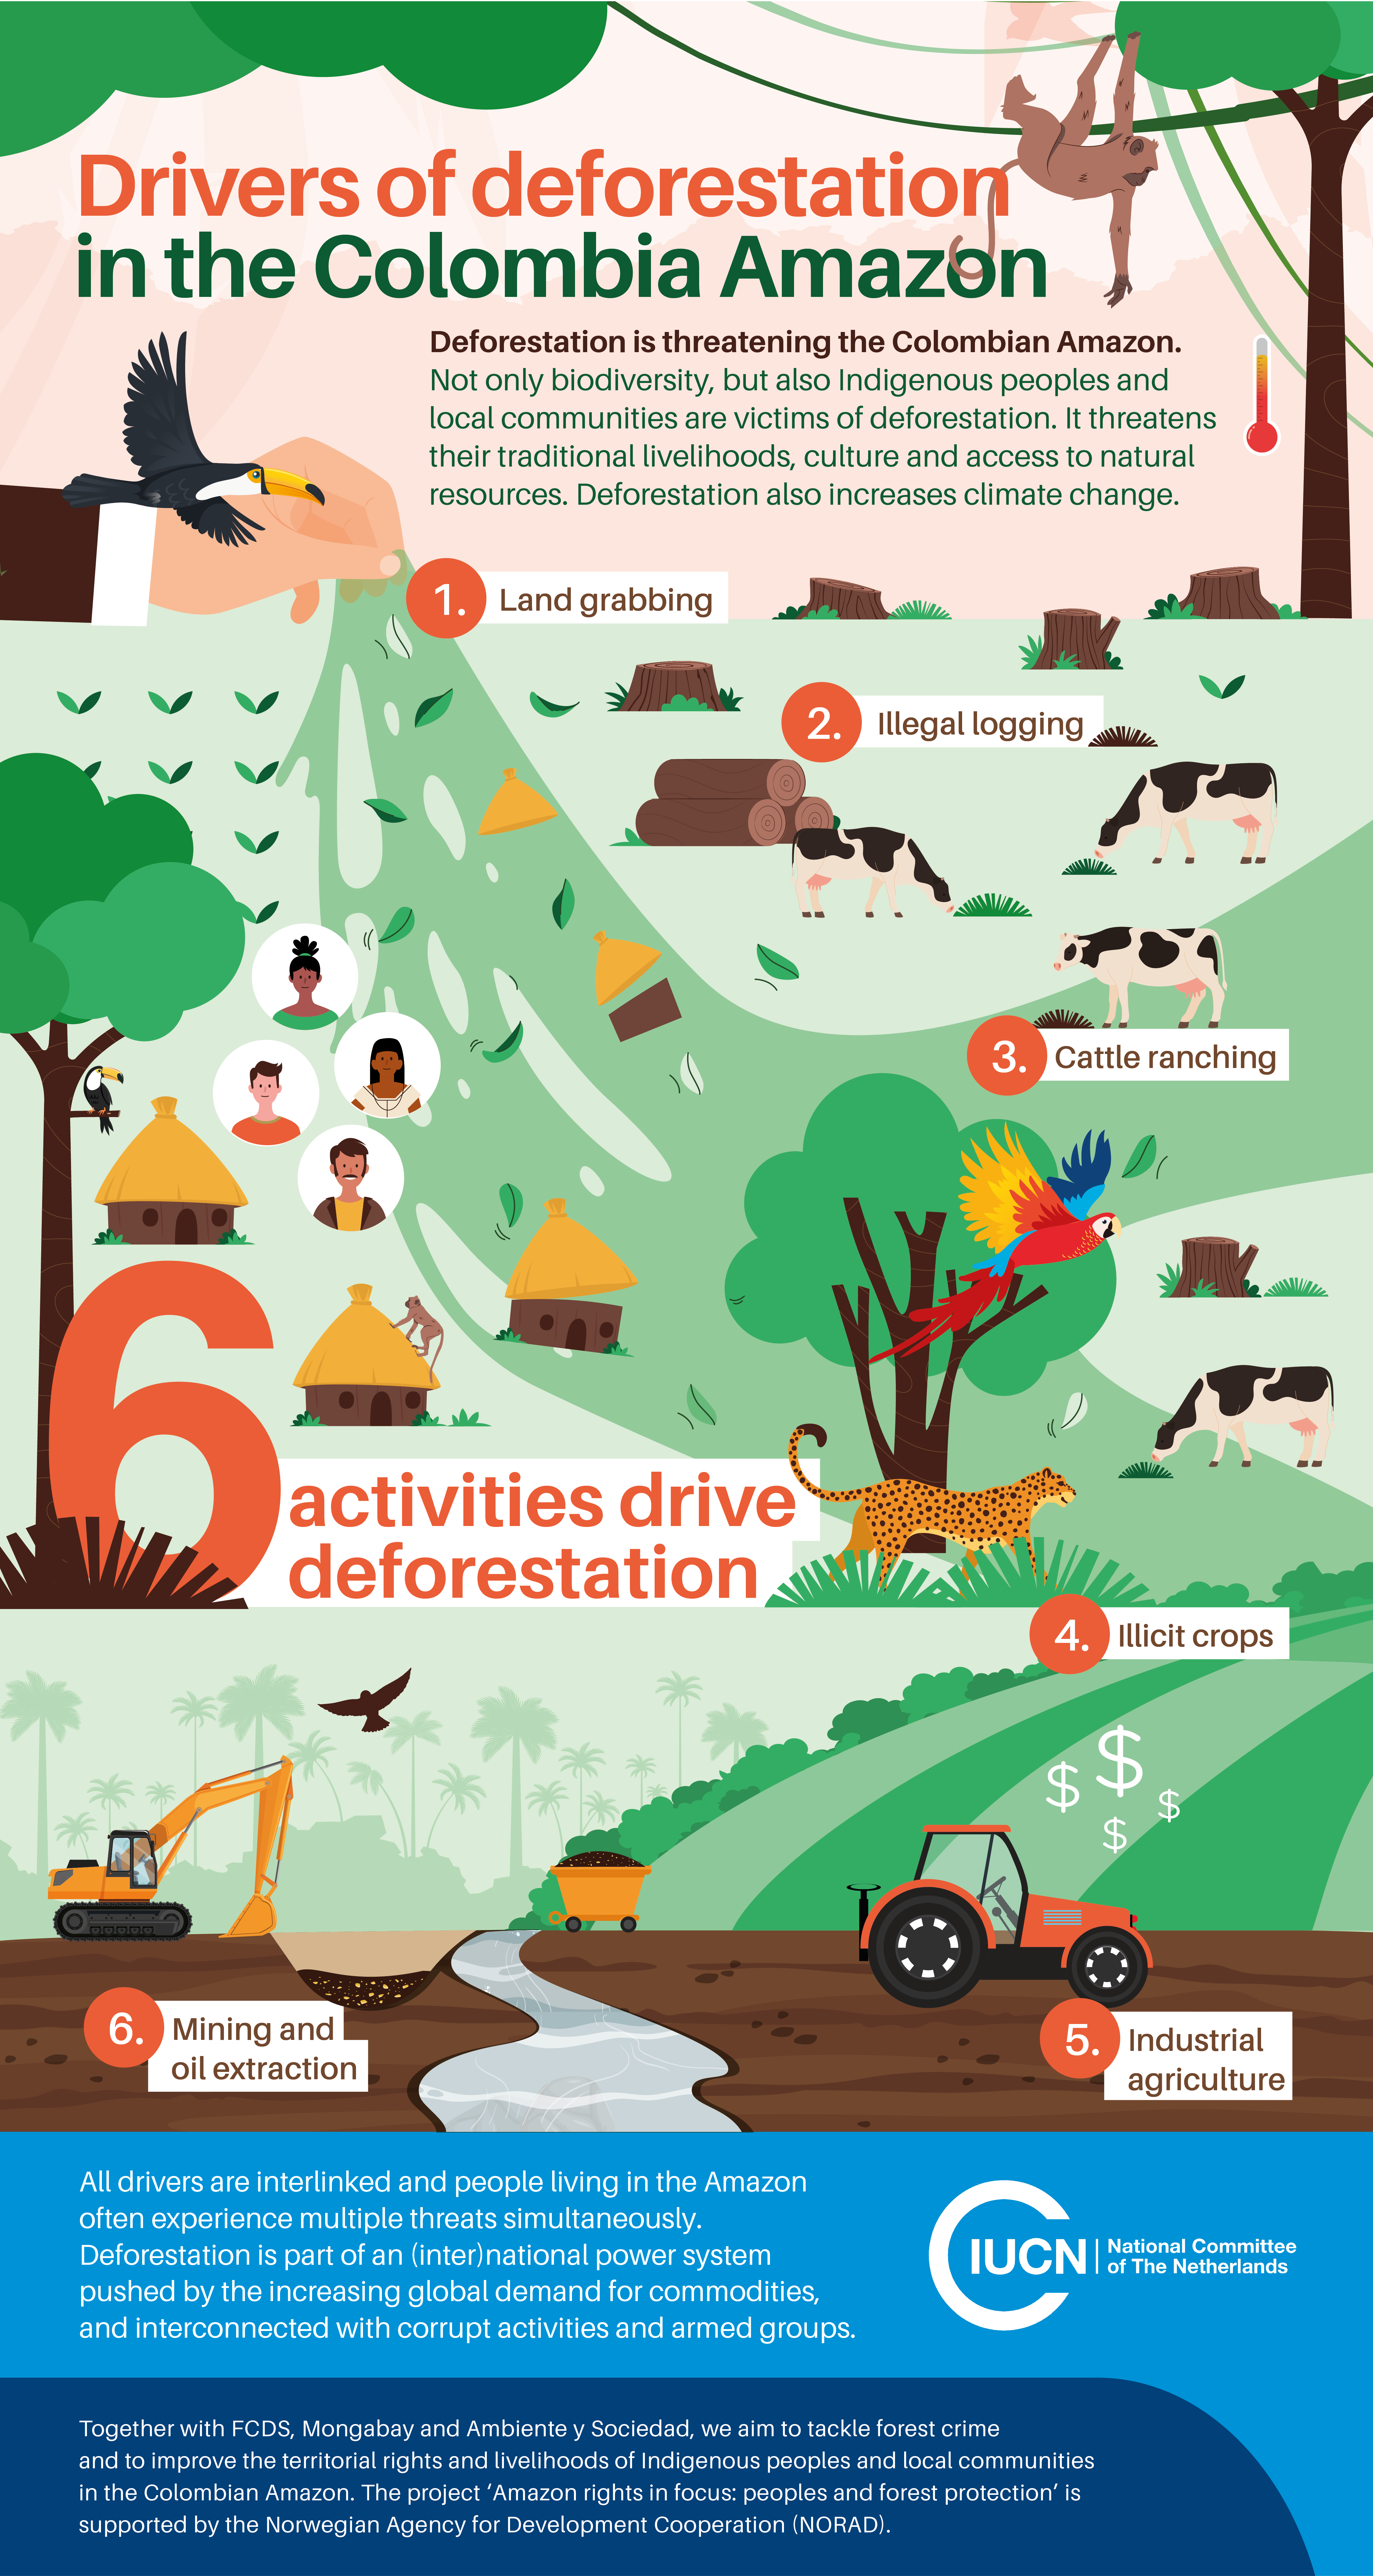 Drivers of deforestation in the Colombian Amazon